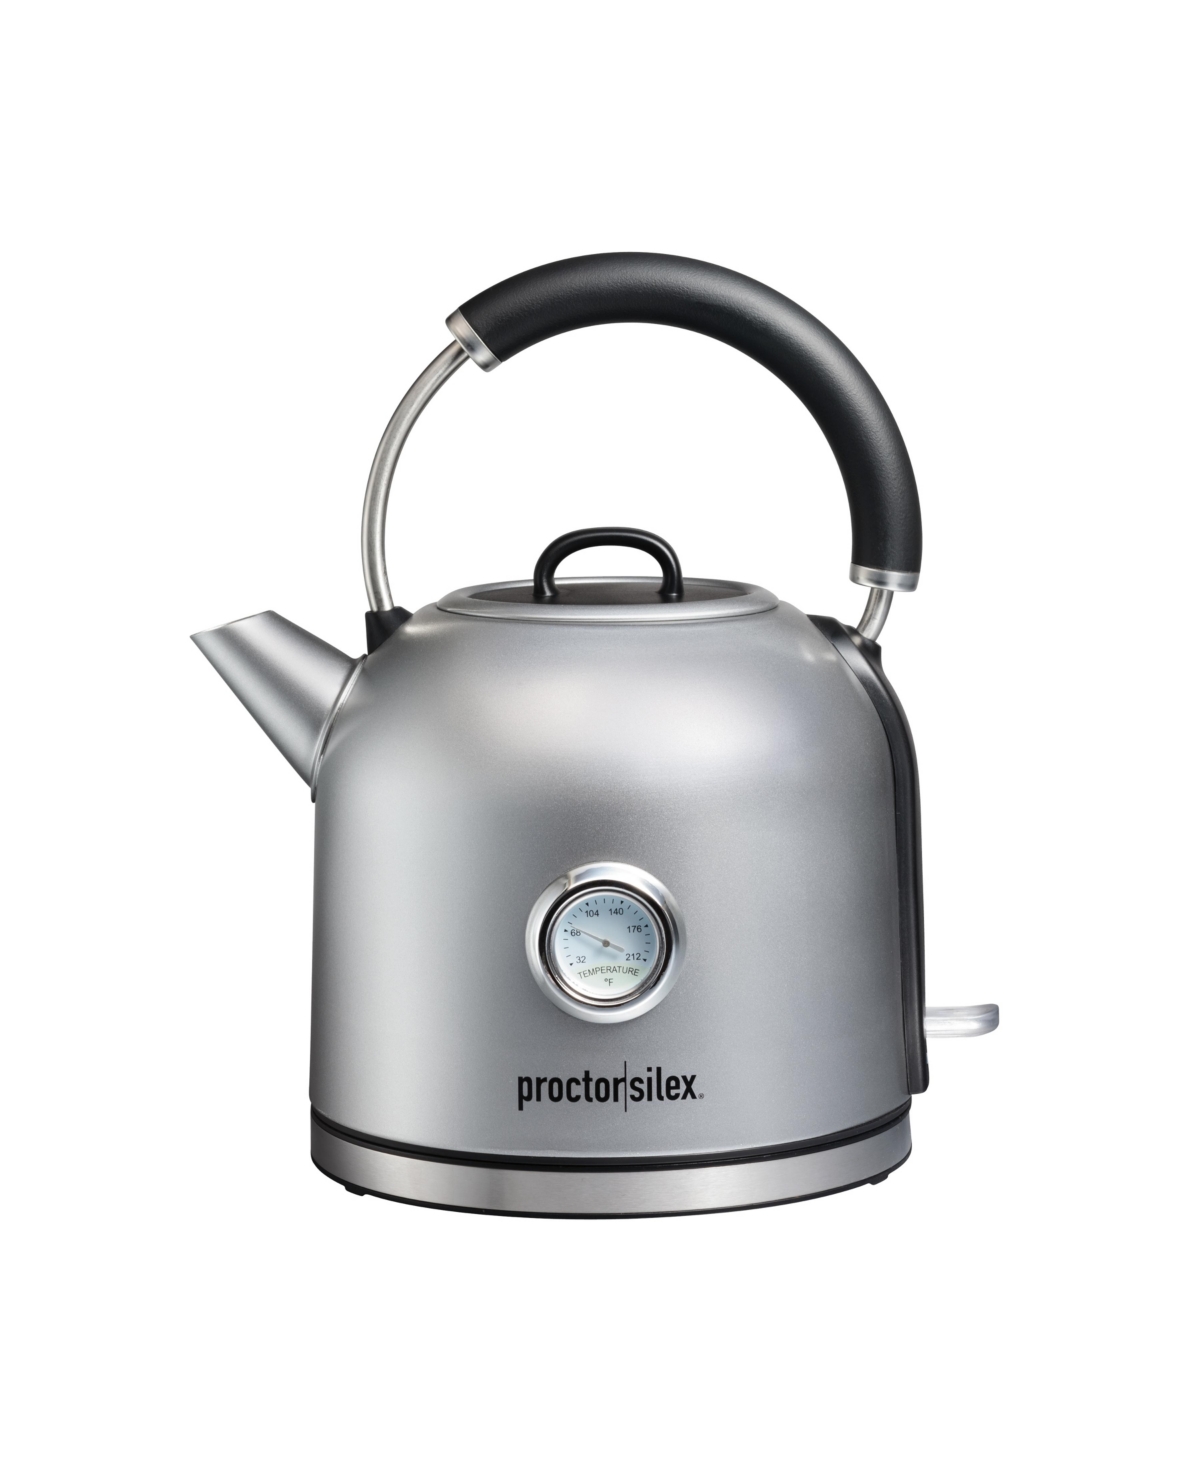 Proctor Silex Electric Dome Kettle In Silver-tone